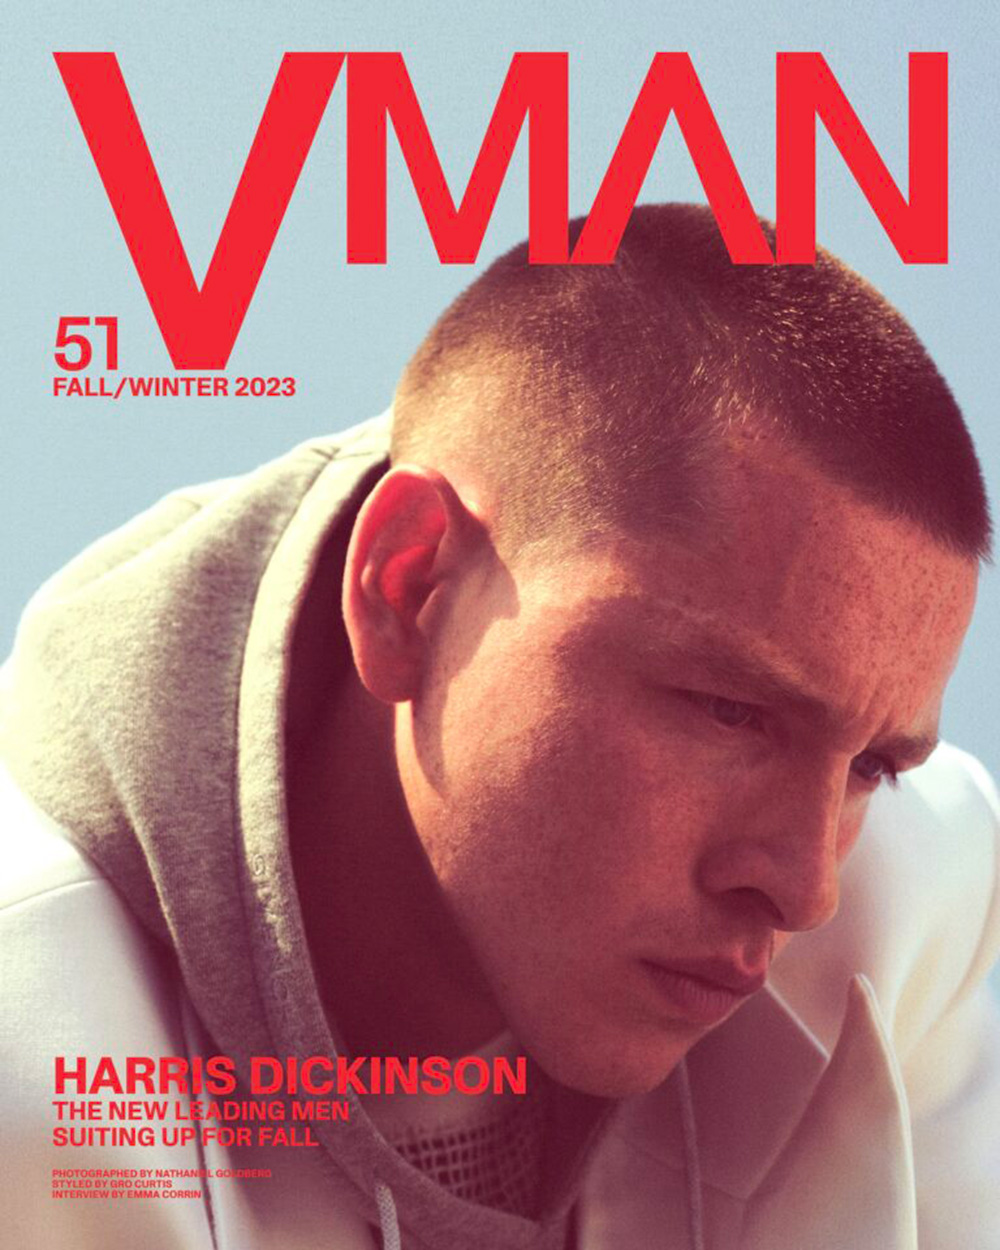 From 'Beach Rats' to VMAN's Cover: Harris Dickinson